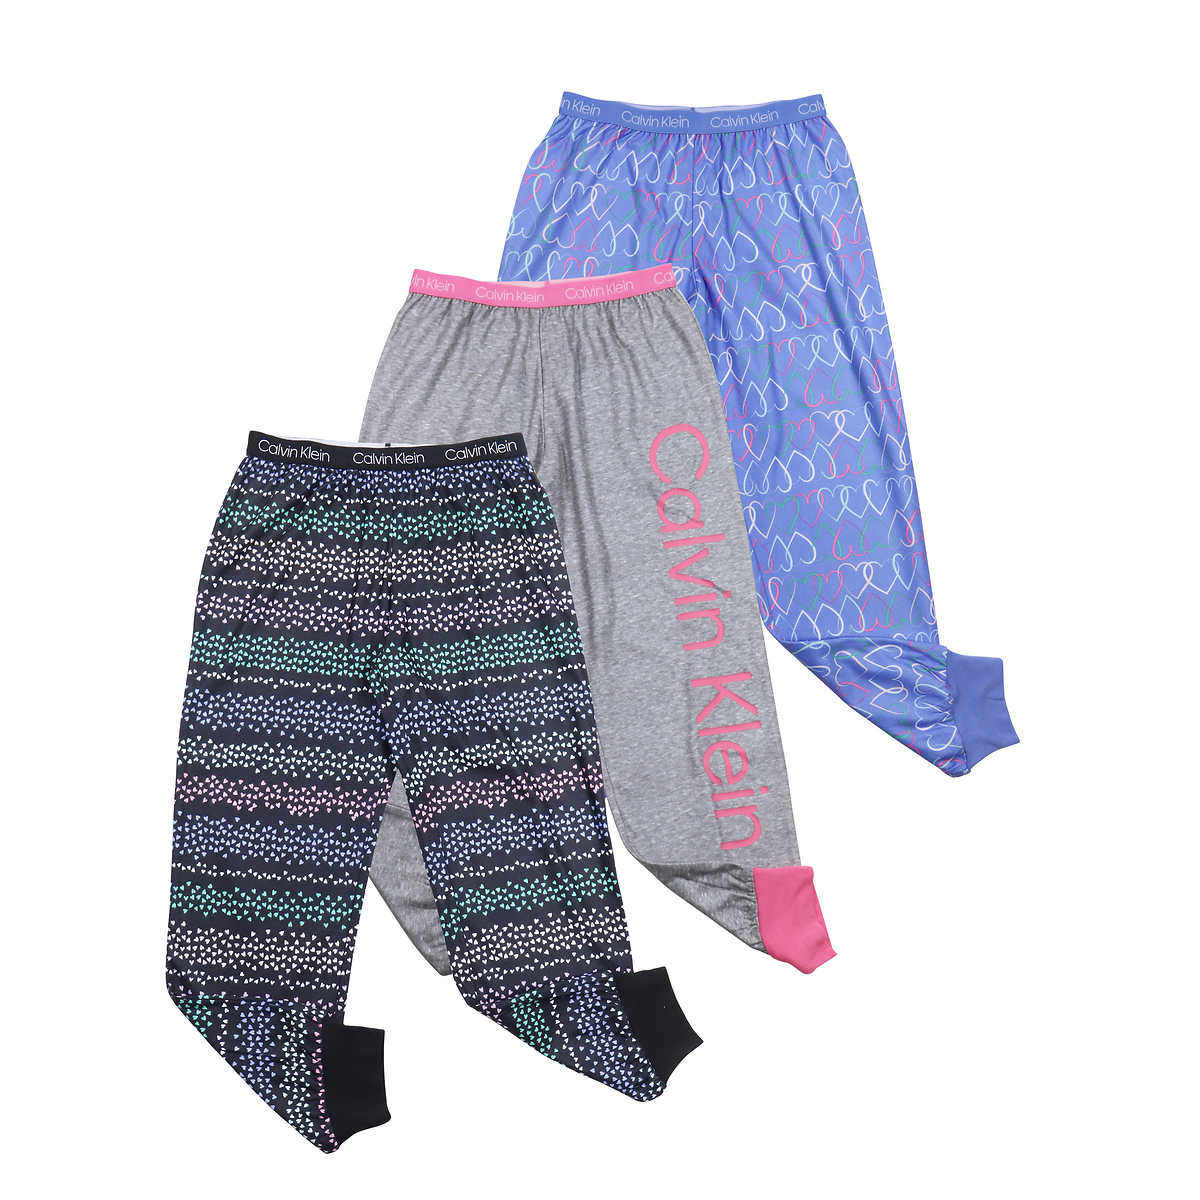  Sleep On It Sleepwear 3-Pack Girls Pajama Pants for Kids Soft  Fleece and Brushed Jersey Loose Fit Comfortable Lounge Bottoms: Clothing,  Shoes & Jewelry